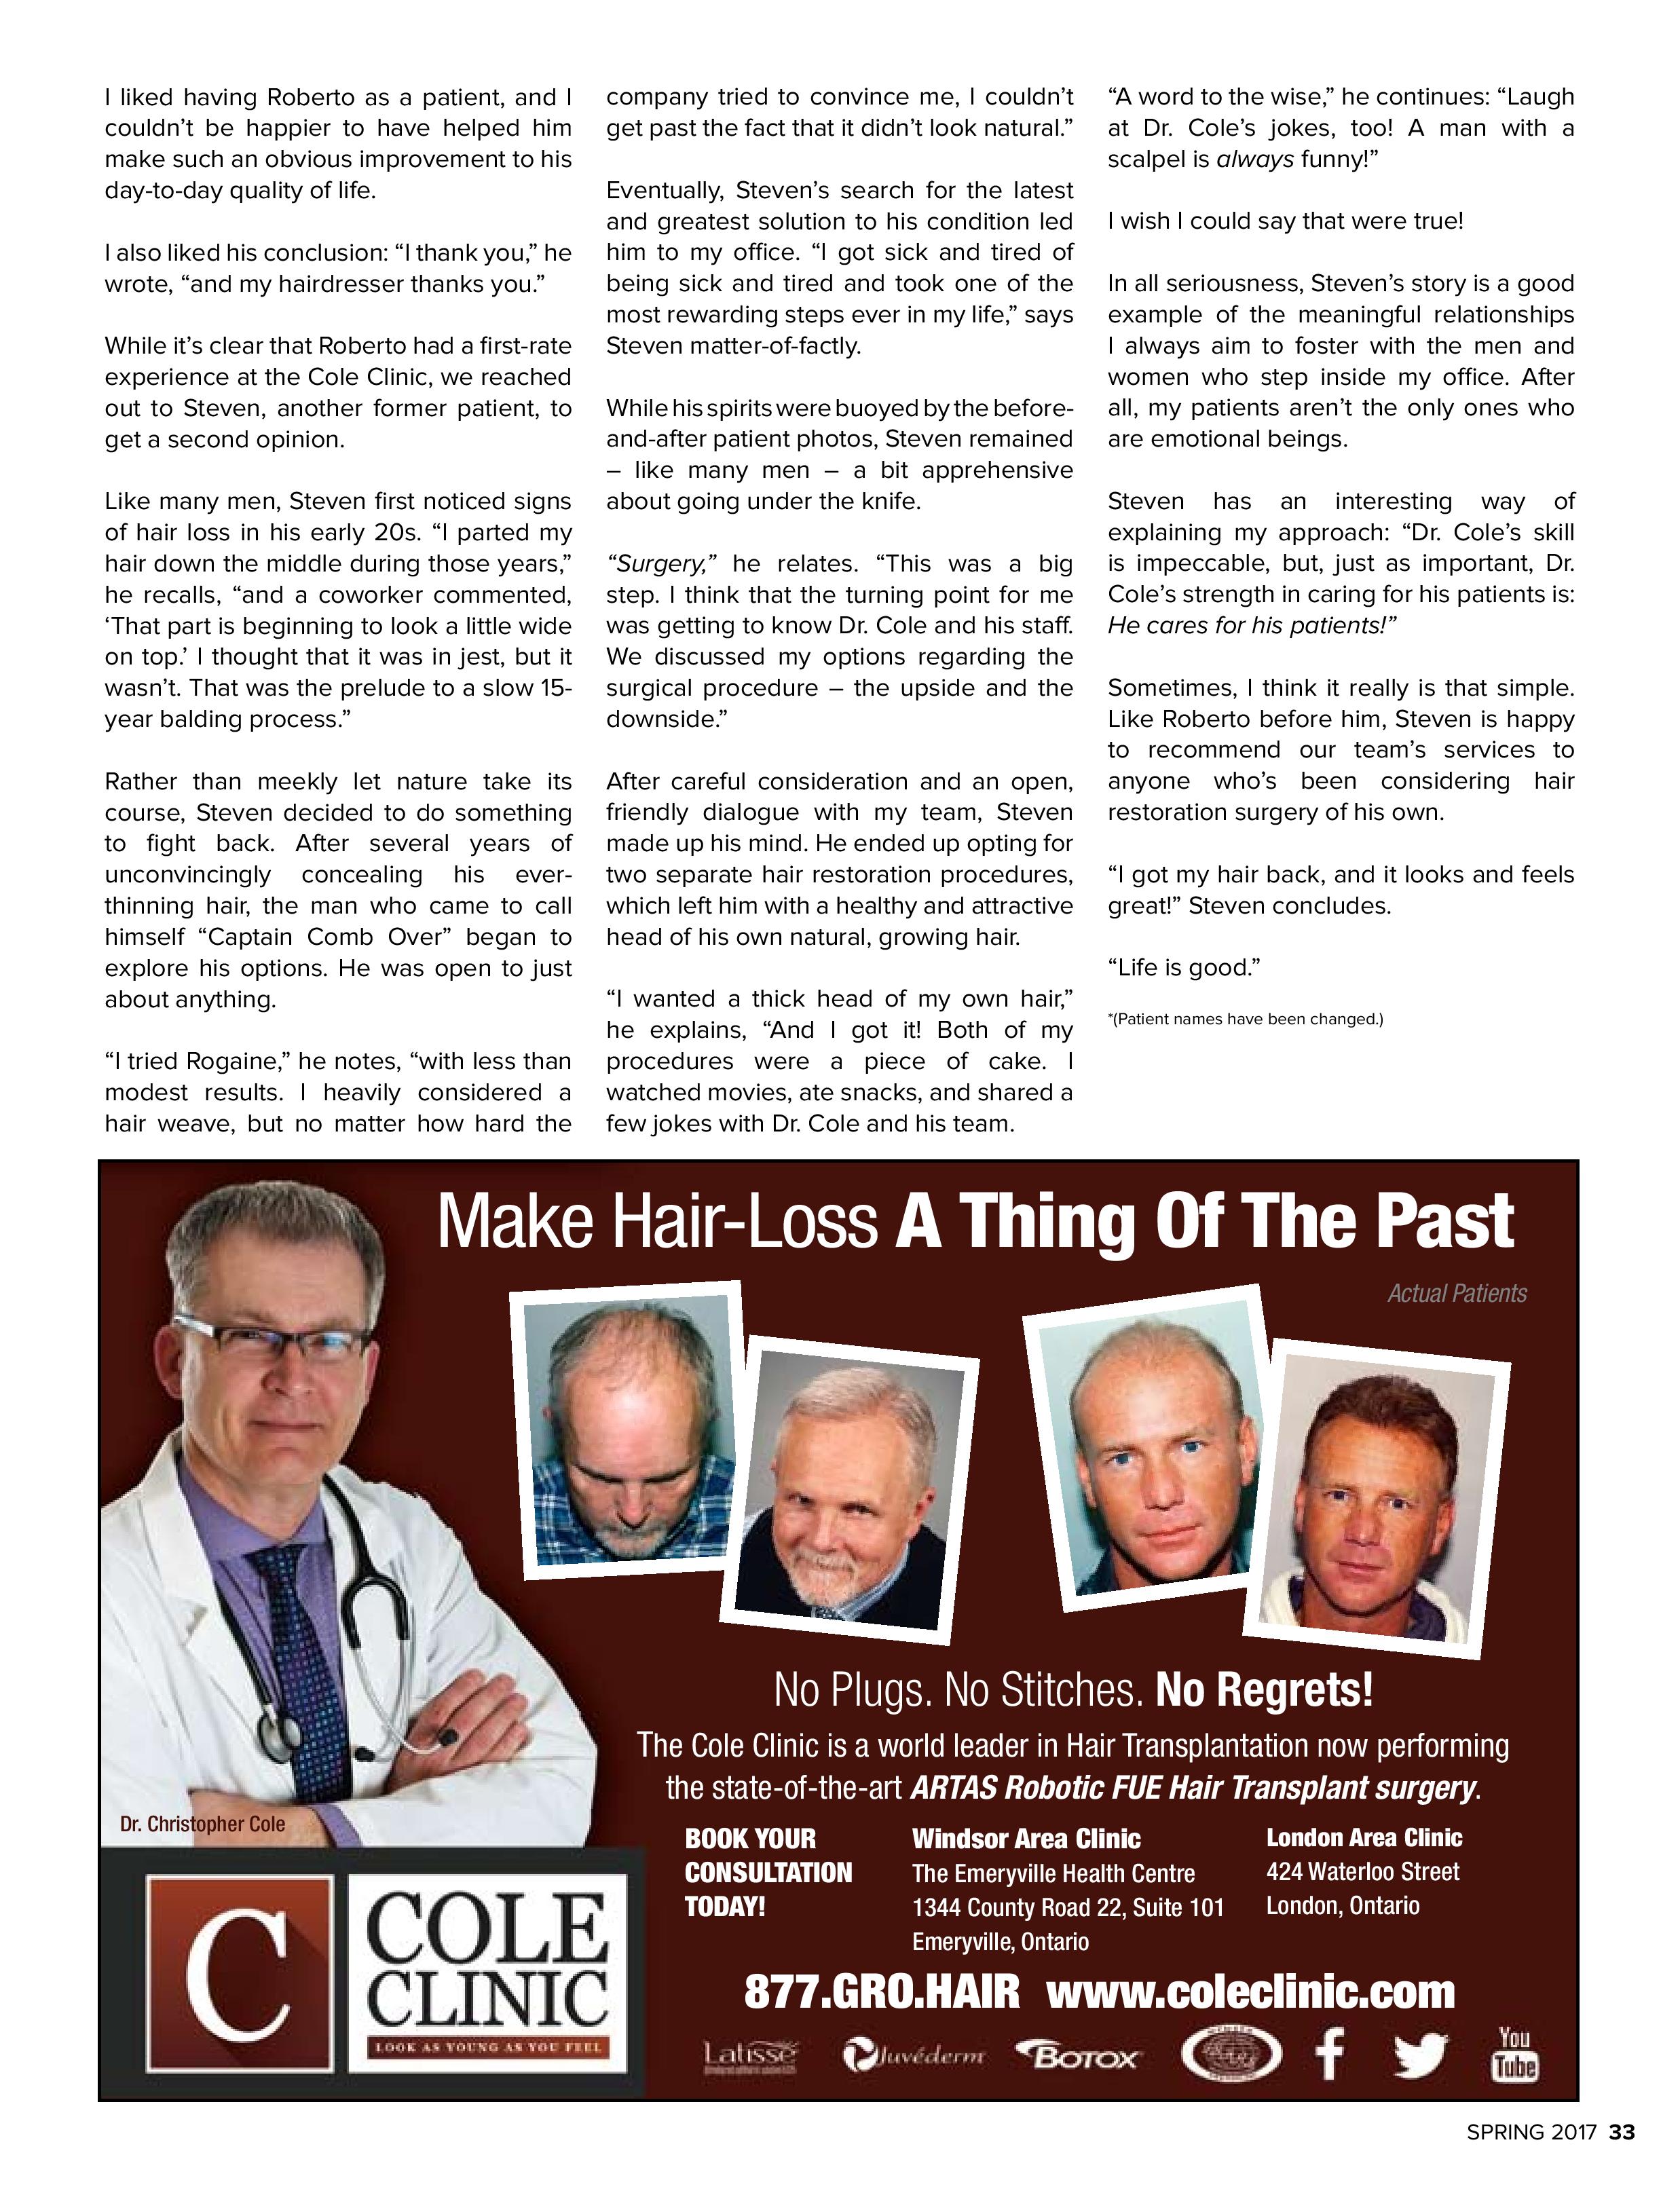 In this article Dr. Cole discusses how hair loss can be devastating to a person's self-image and confidence, and how hair restoration procedures can help.